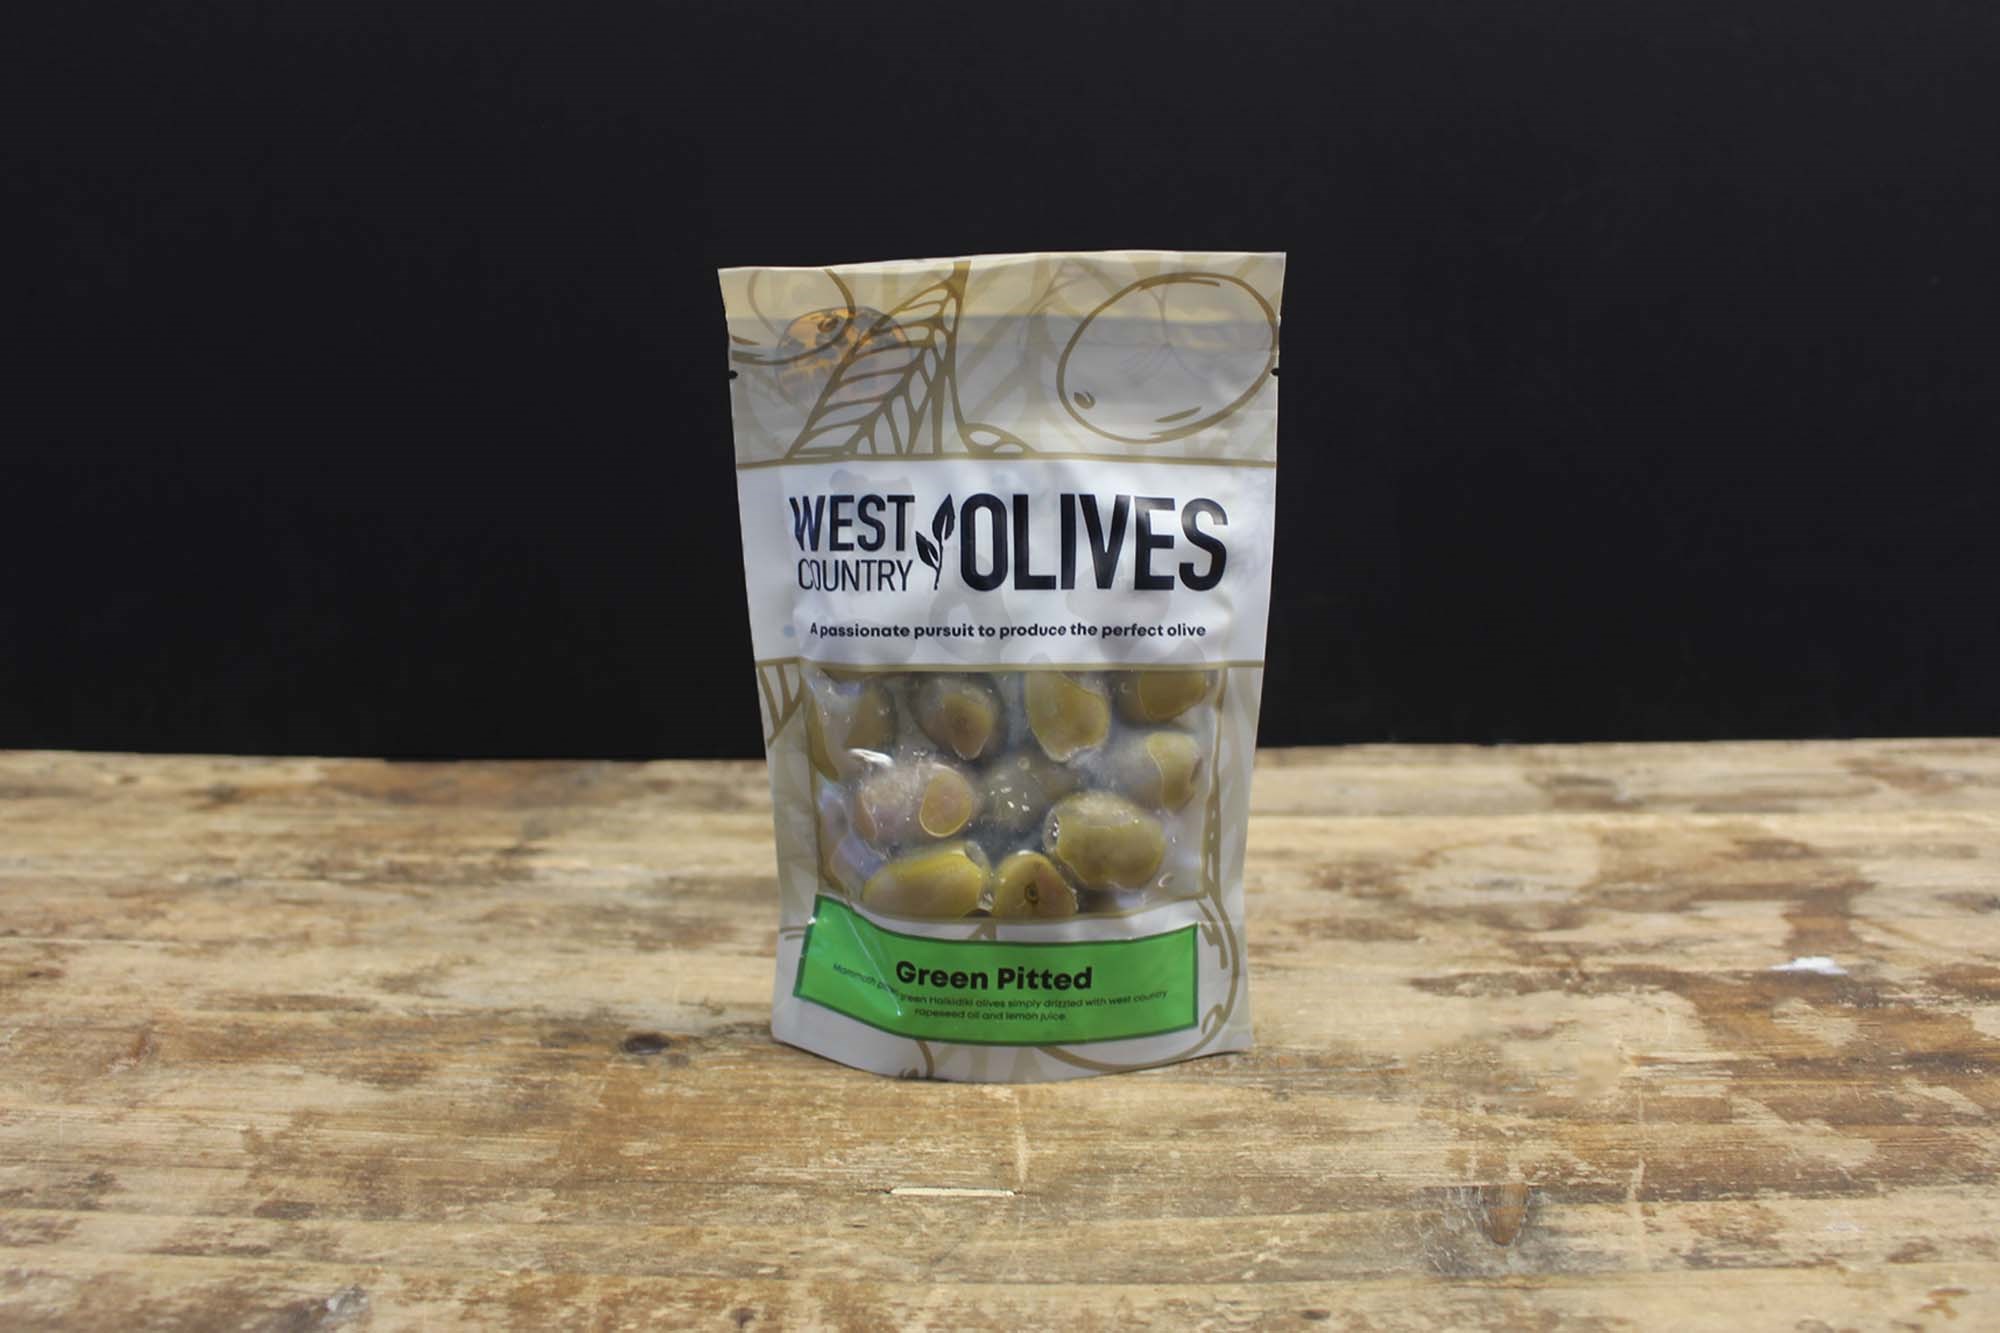 West Country Olives Green Pitted Olives